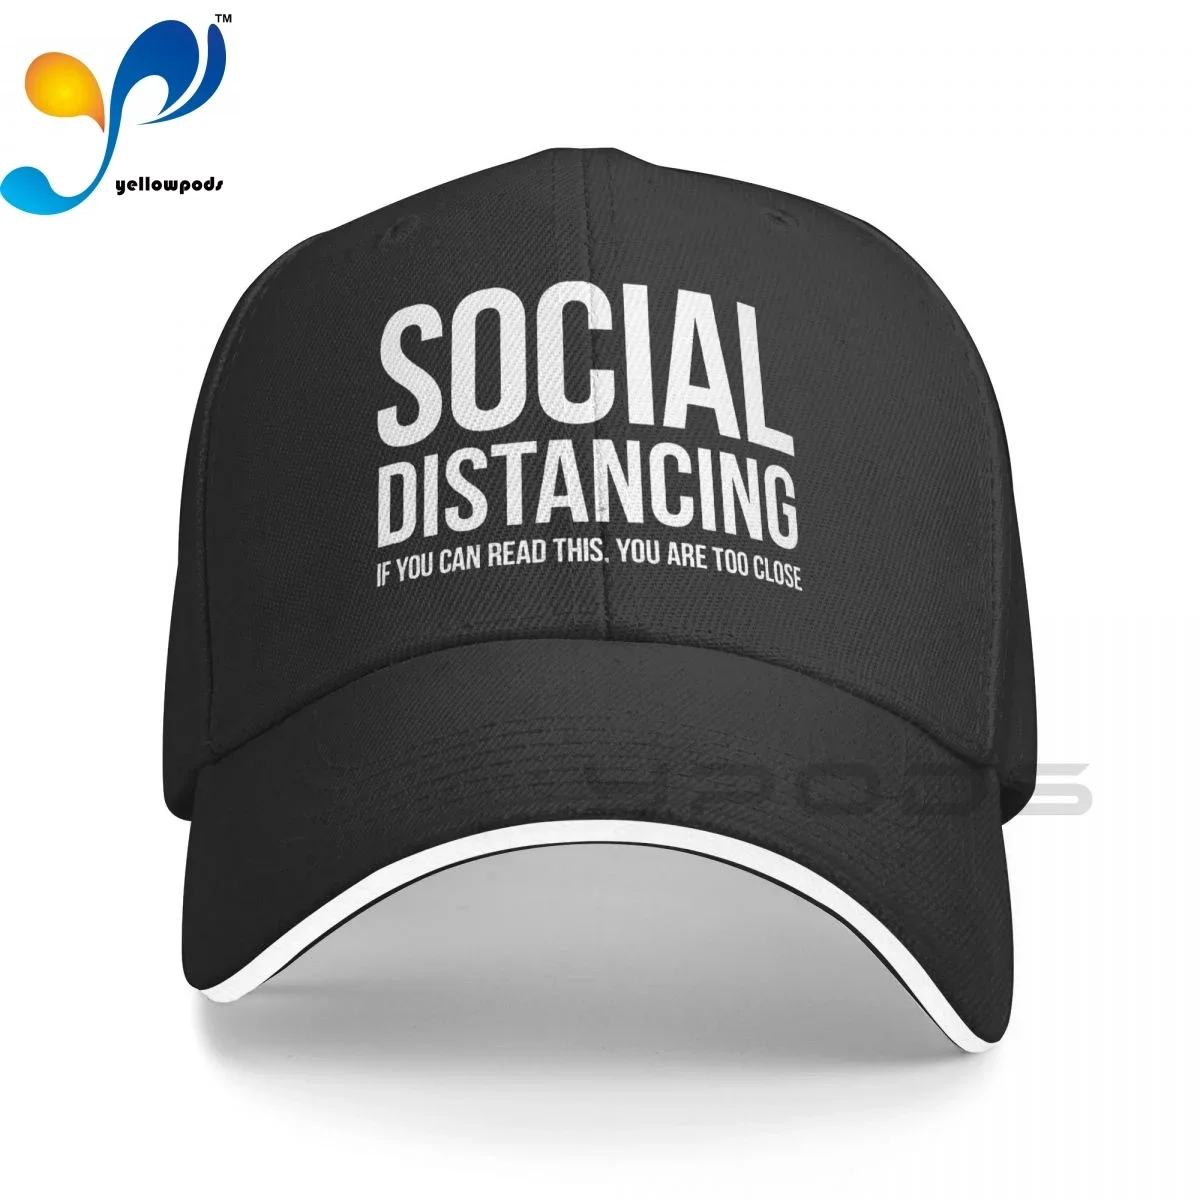 

Unisex Cotton Cap For Women Men SOCIAL DISTANCING IF YOU CAN READ THIS YOU RE TOO CLOSE Fashion Baseball Cap Adjustable